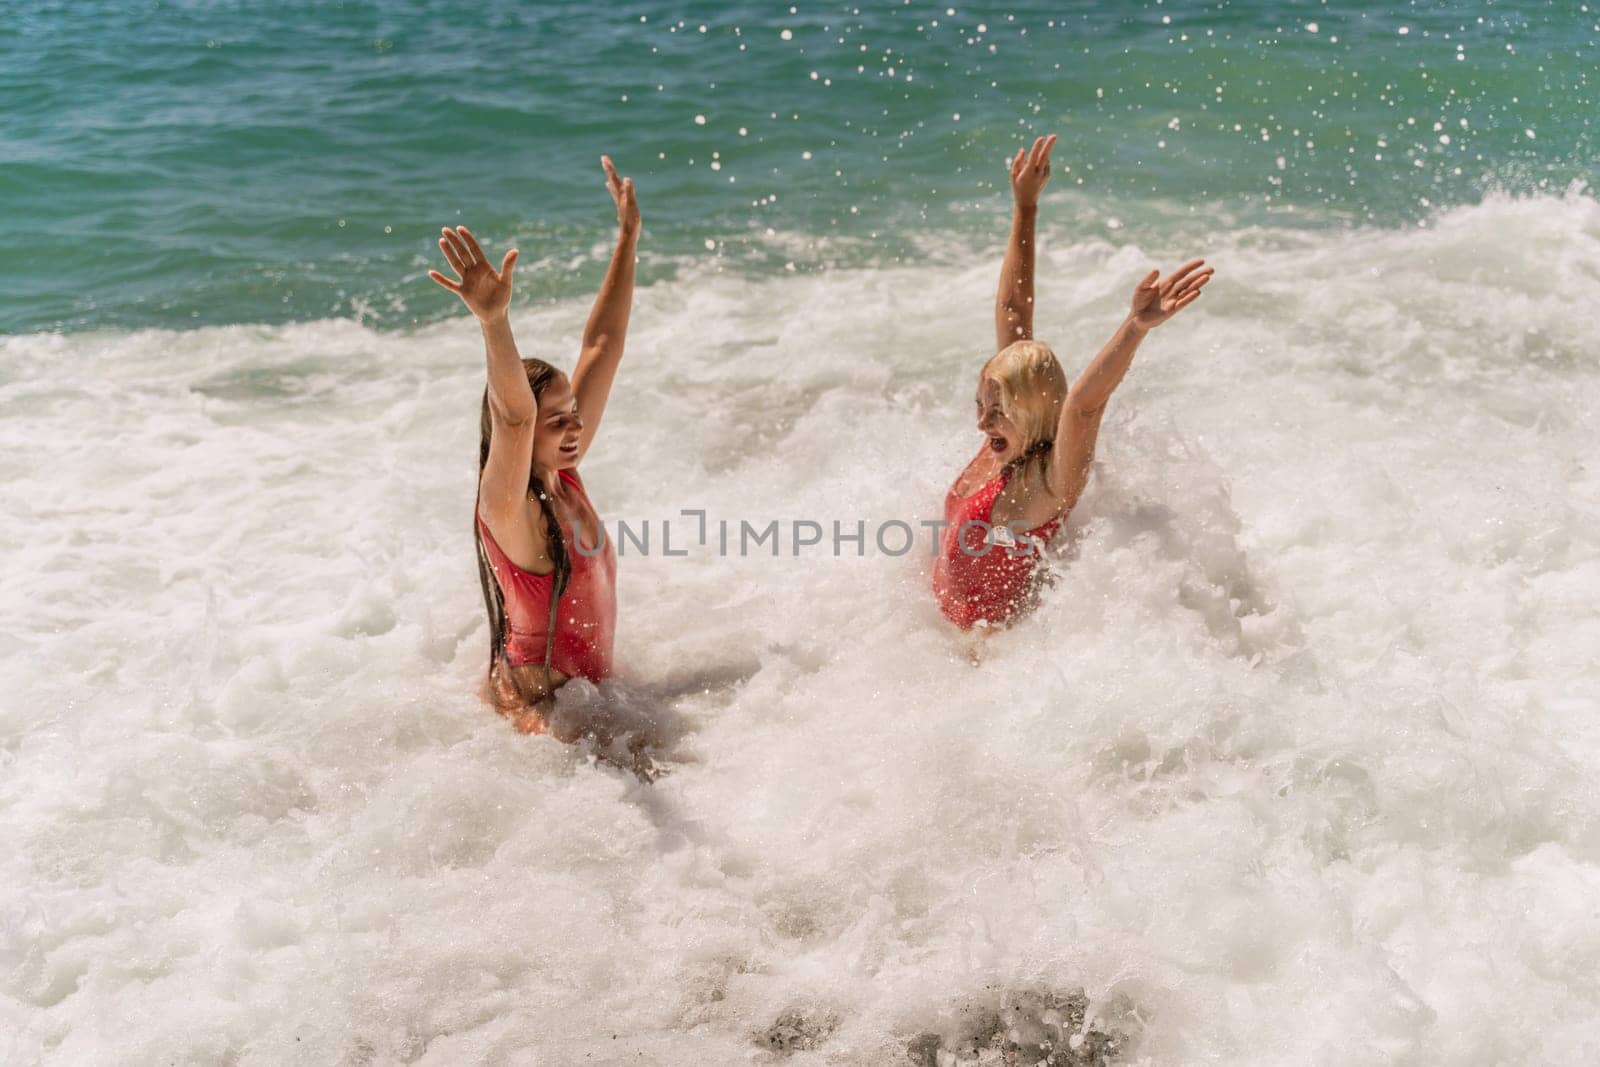 Women ocean play. Seaside, beach daytime, enjoying beach fun. Two women in red swimsuits enjoying themselves in the ocean waves and raising their hands up. by Matiunina